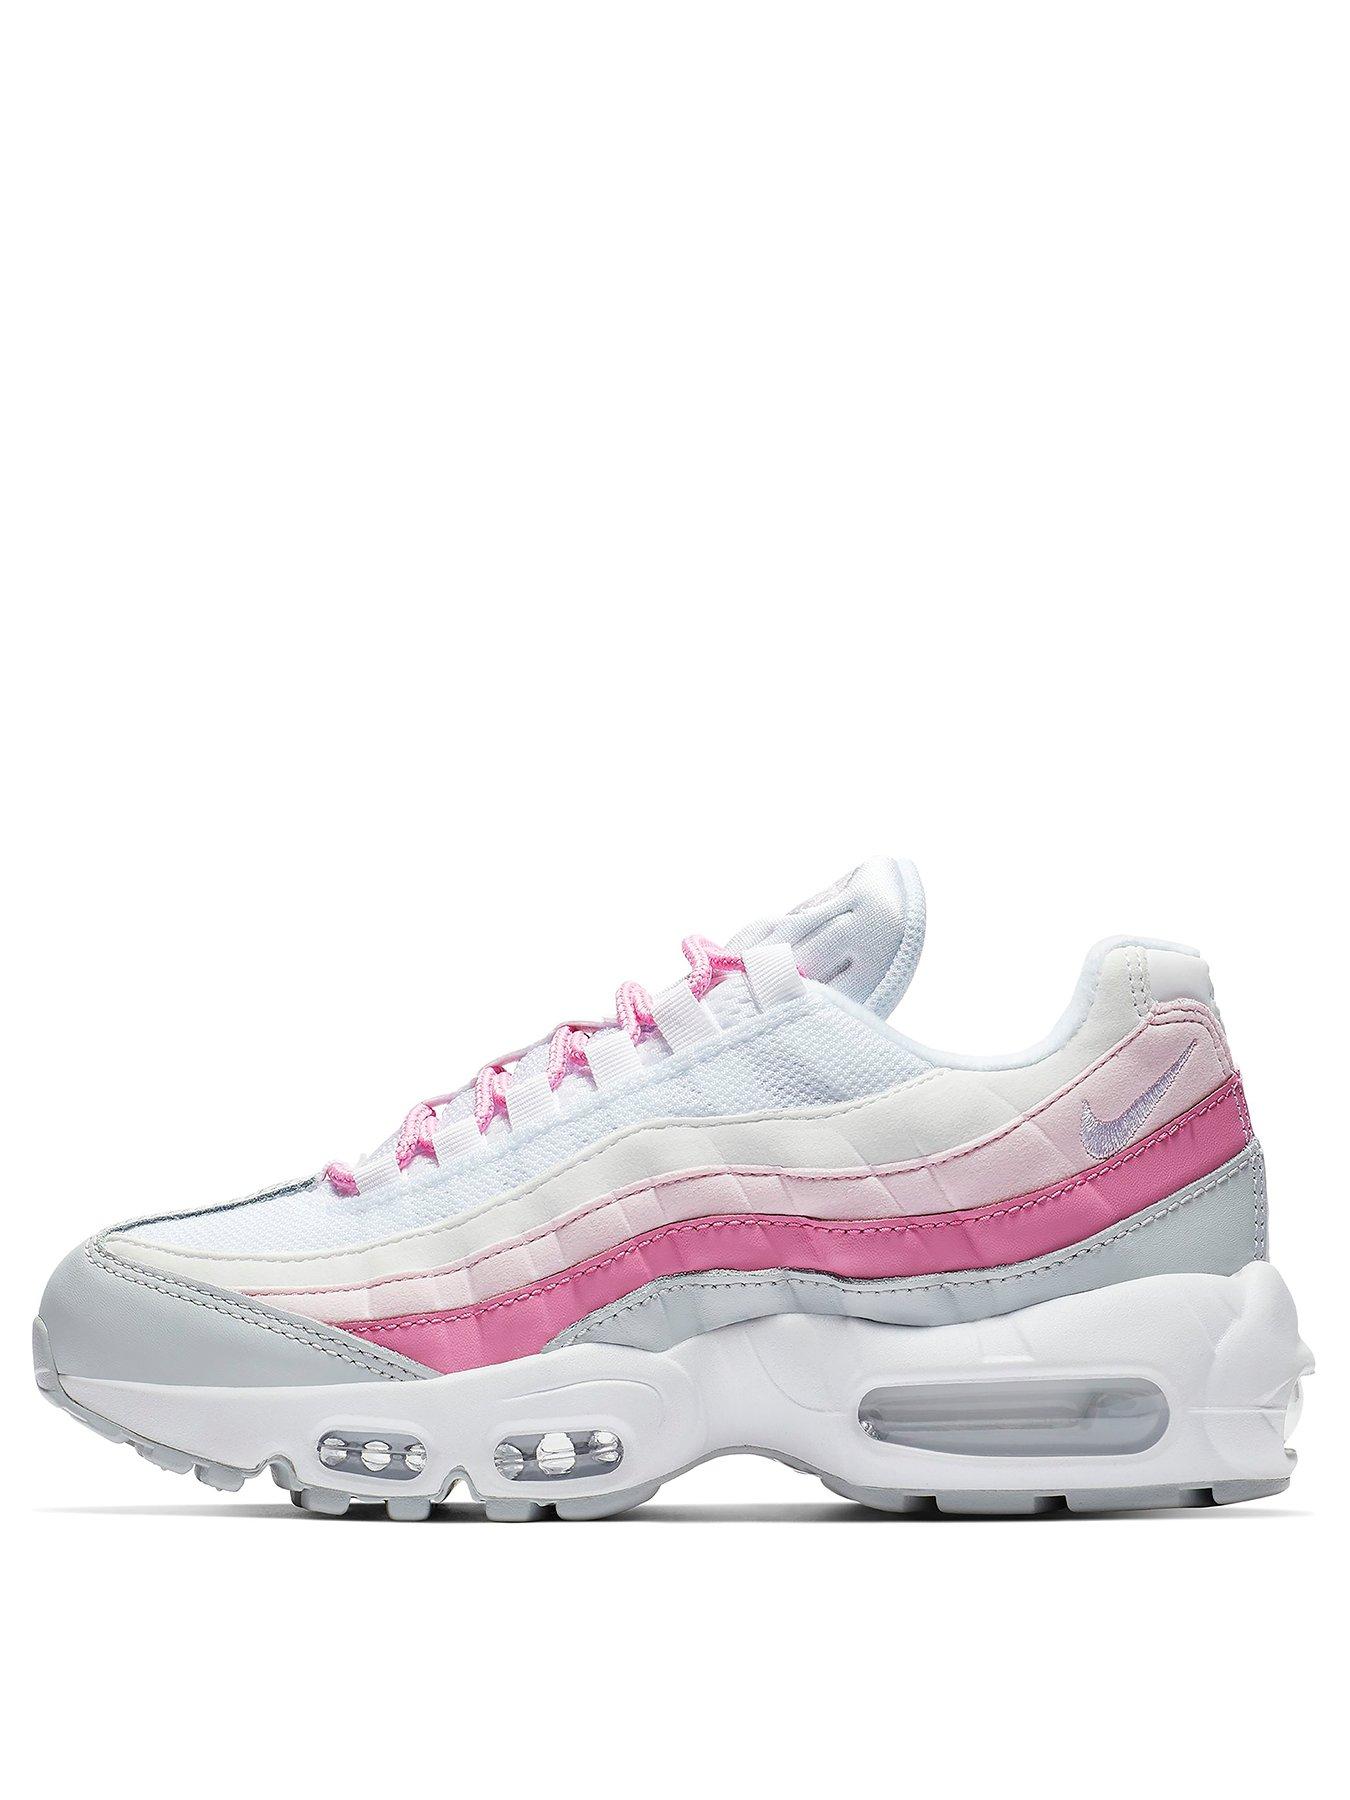 nike air max 95 pink and white